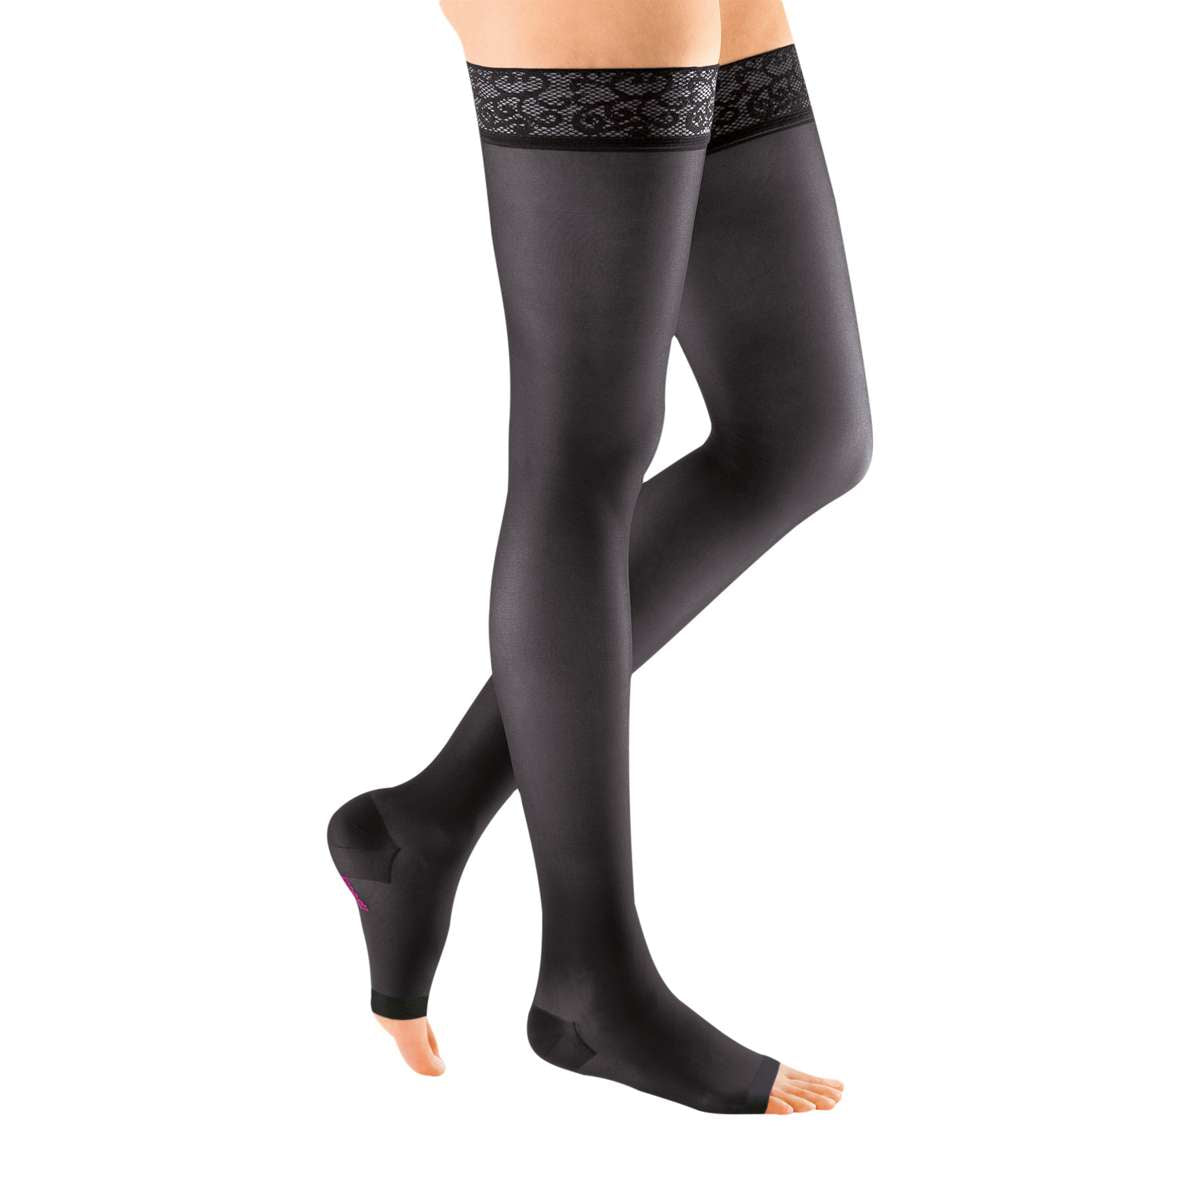 mediven sheer & soft 20-30 mmHg Thigh High w/Lace Silicone Topband